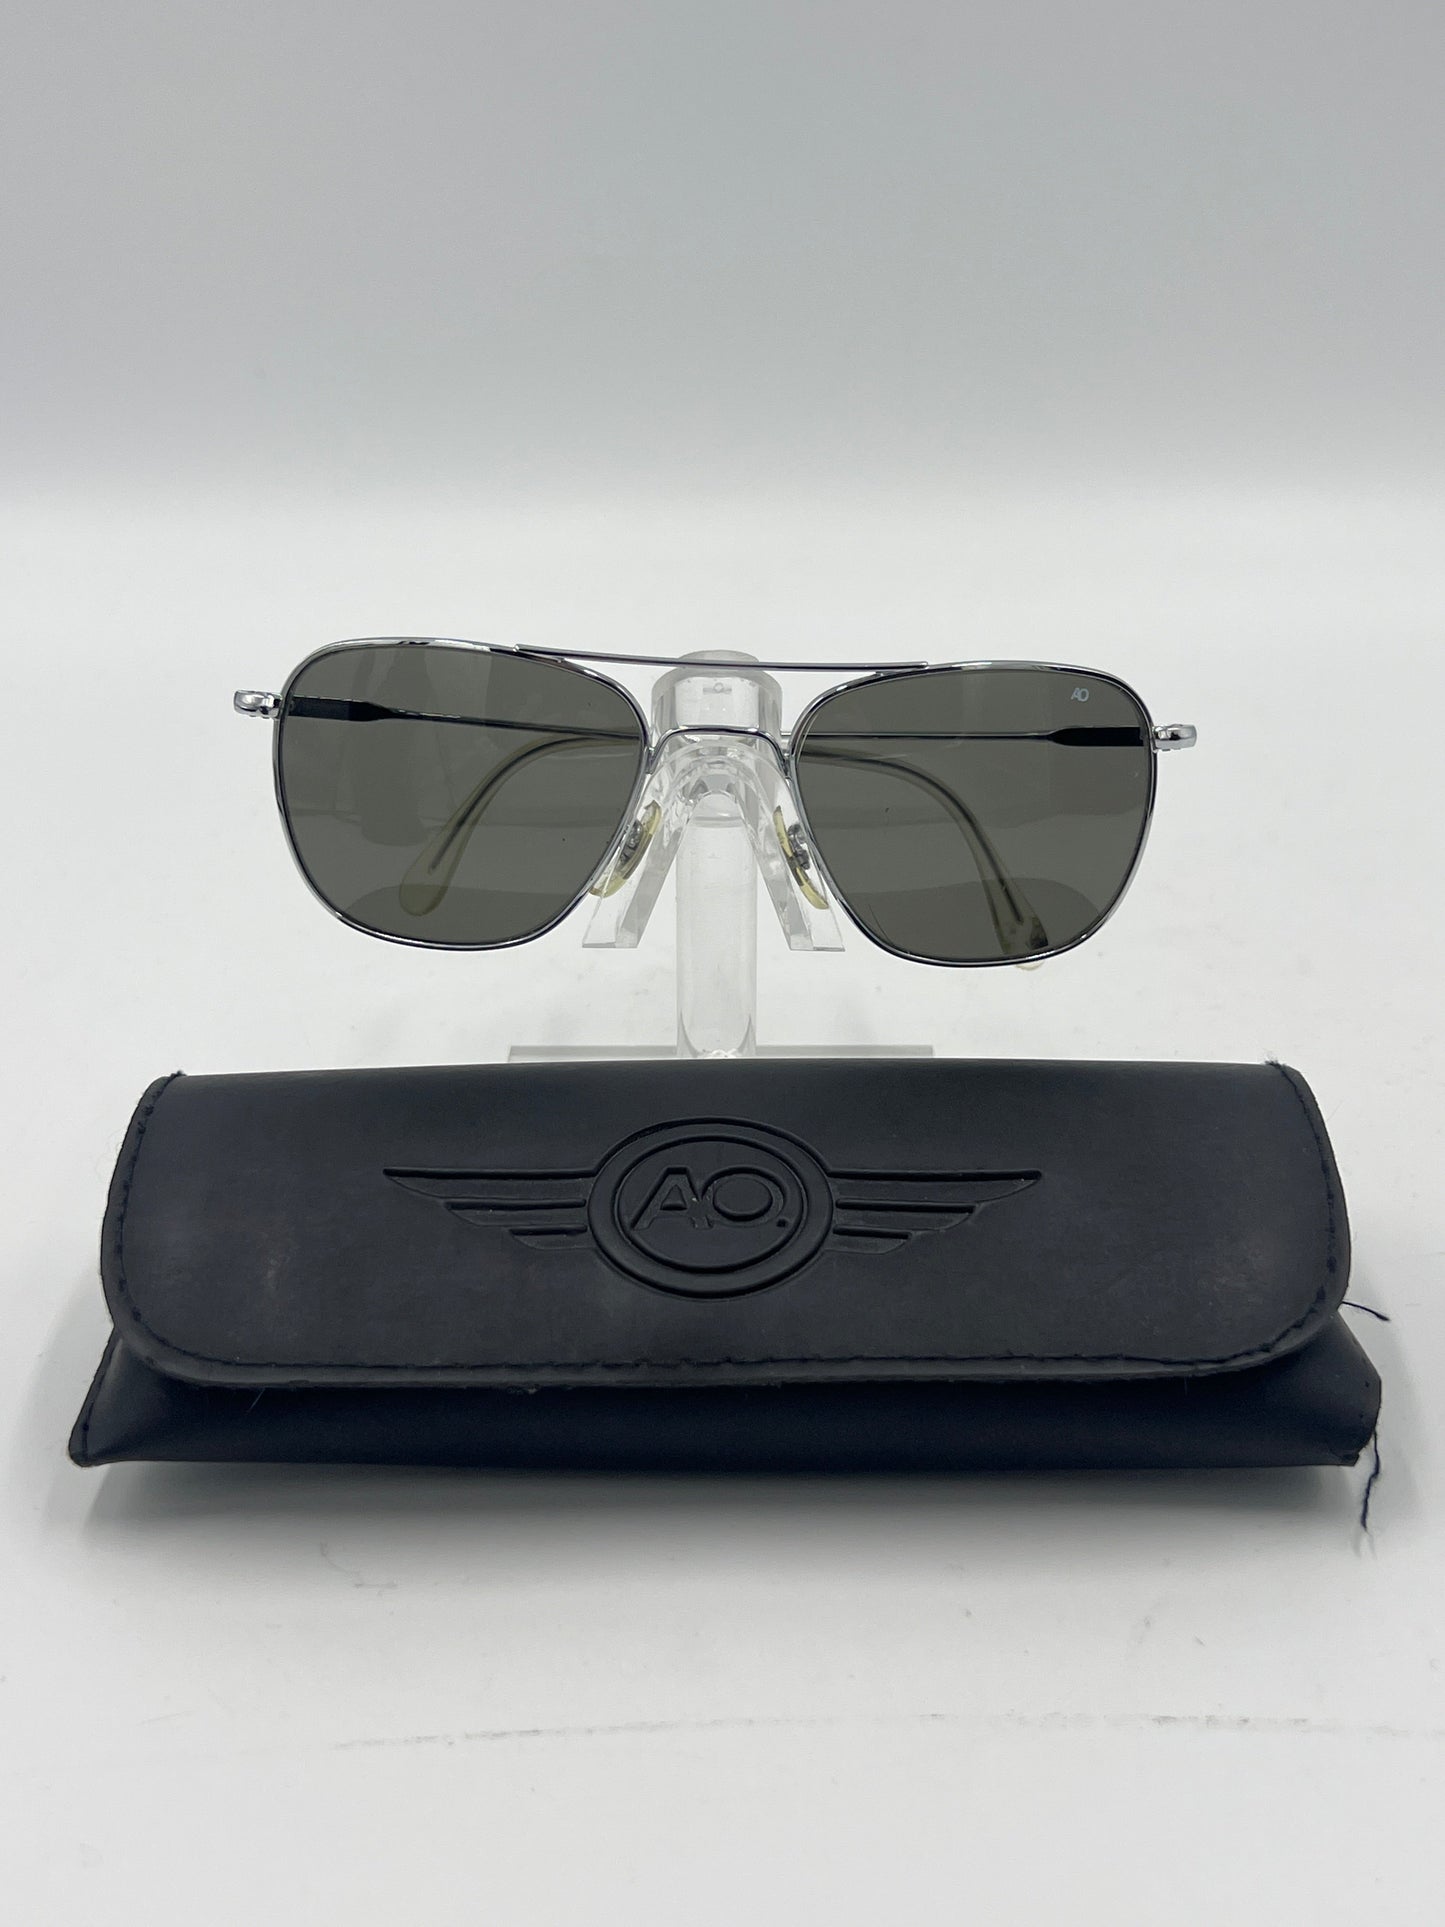 Sunglasses By AMERICAN OPTICAL